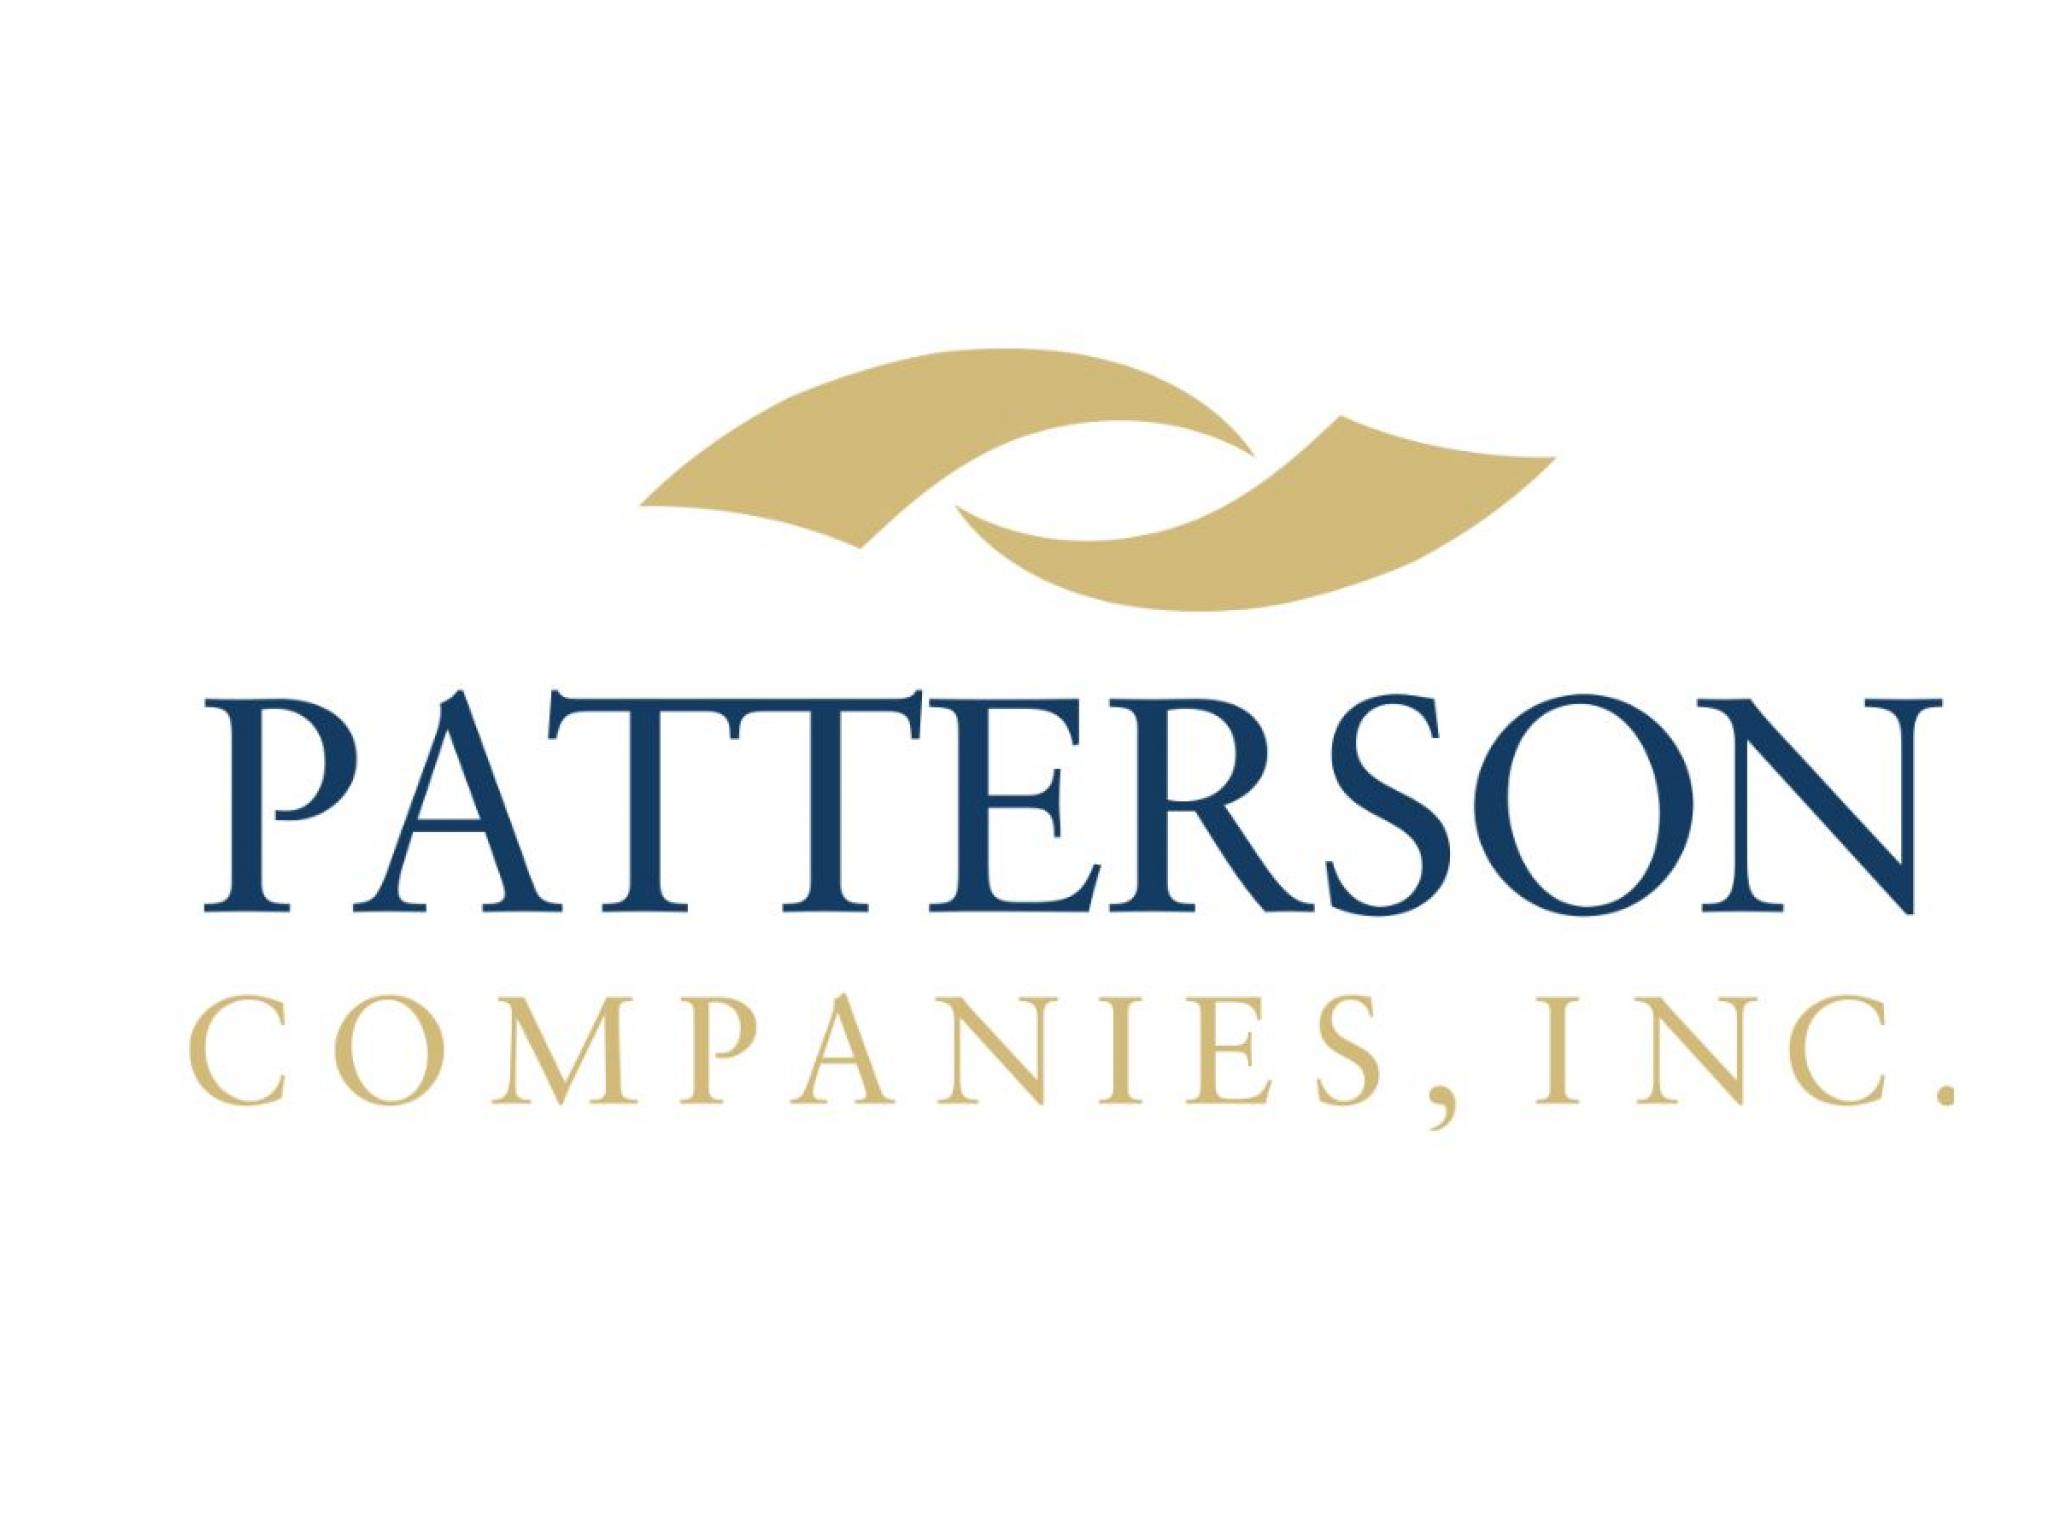  why-patterson-companies-shares-are-trading-lower-by-around-14-here-are-other-stocks-moving-in-wednesdays-mid-day-session 